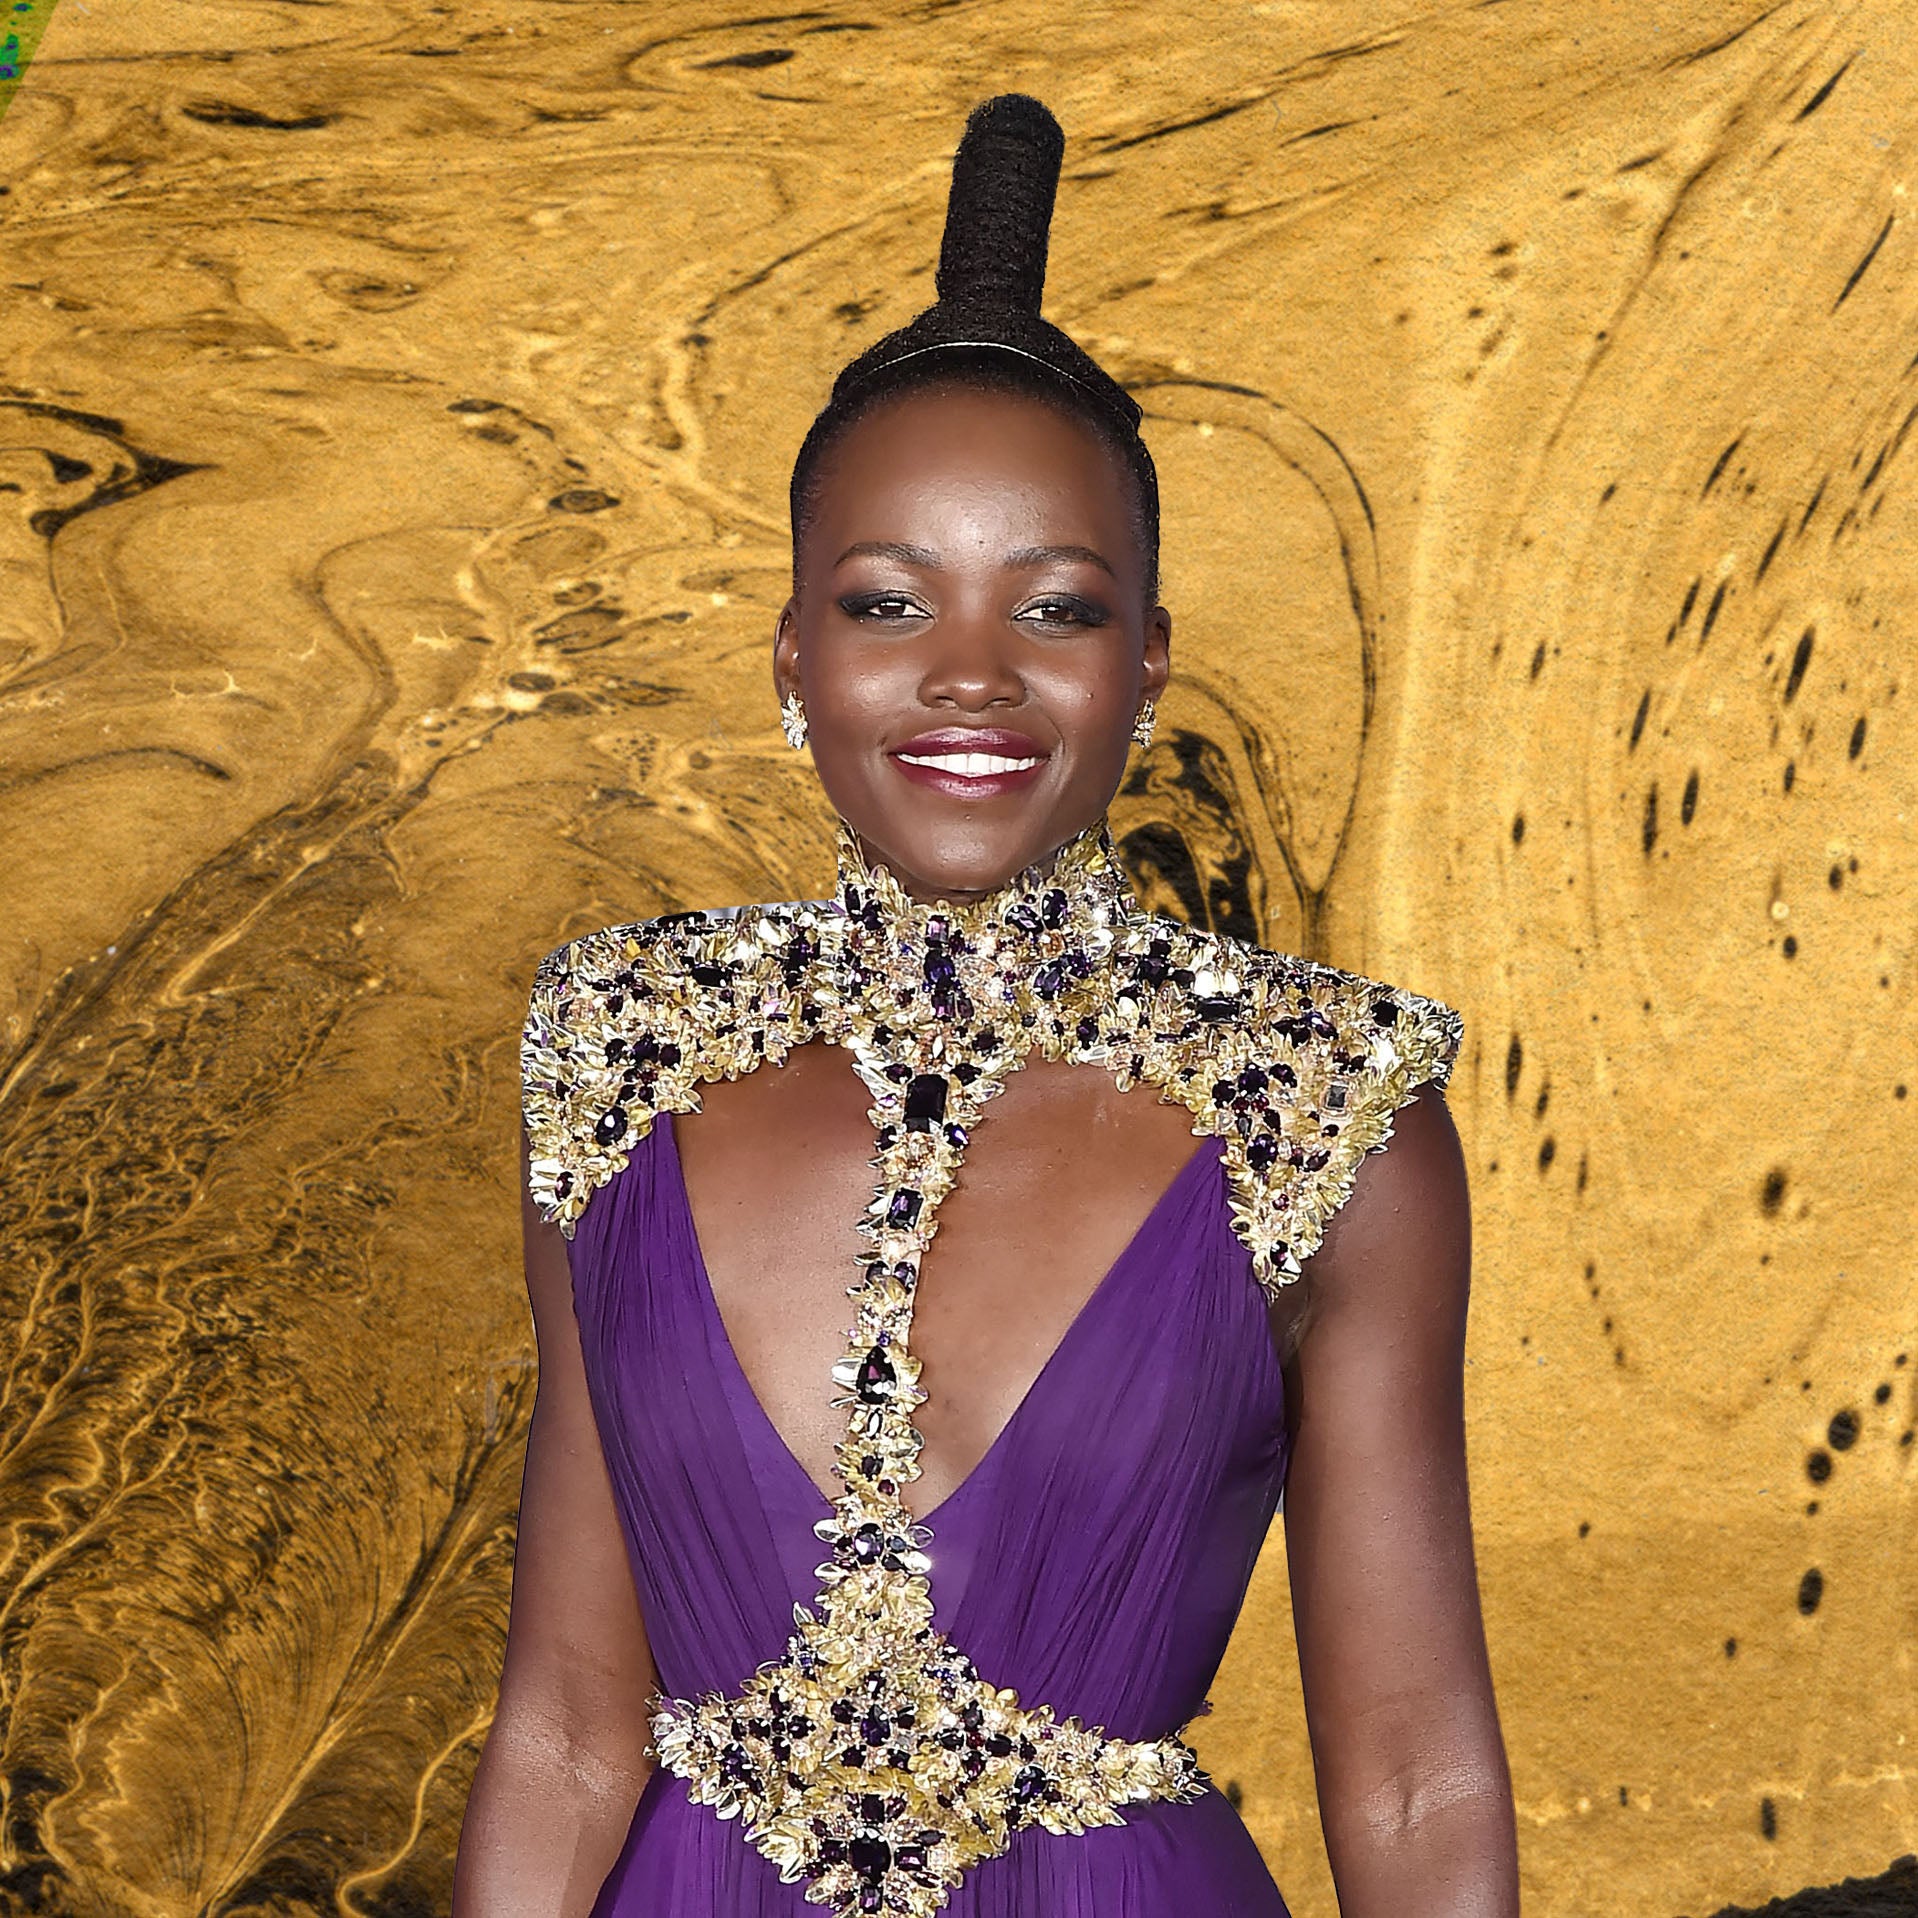 Lupita Nyong'o Got Fit for 'Black Panther' with These 5 Smart Food Hacks
